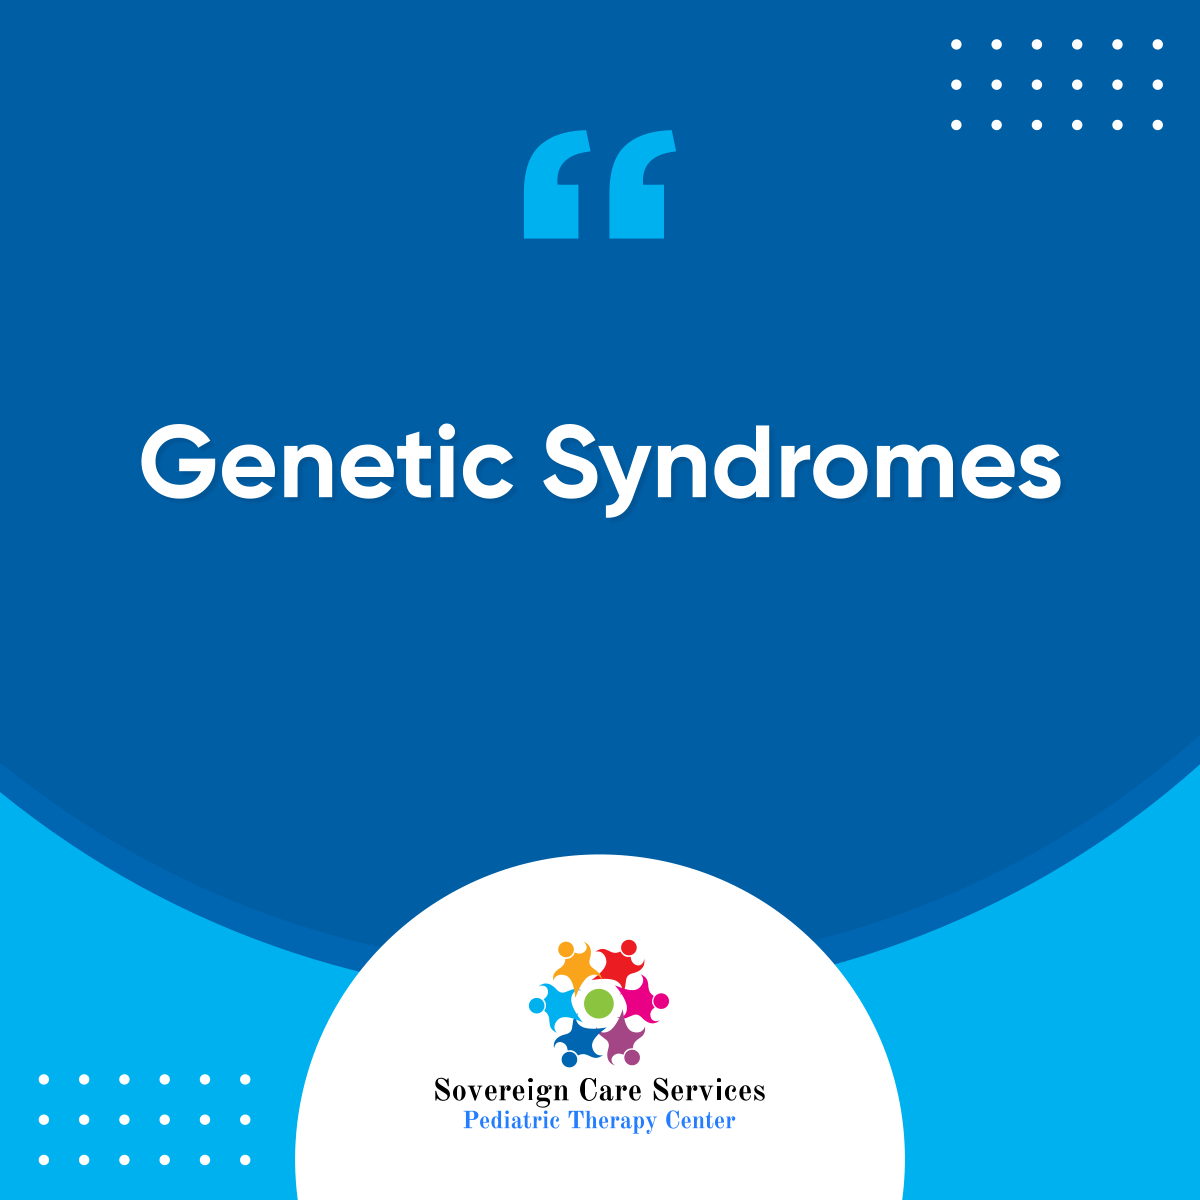 Genetic Syndromes

Down Syndrome causes developmental and intellectual delays, whereas Muscular Dystrophy impacts muscle mass and strength. For immediate intervention, contact us and schedule your child’s physical therapy. Get in touch!

#GeneticSyndromes #DownSyndrome